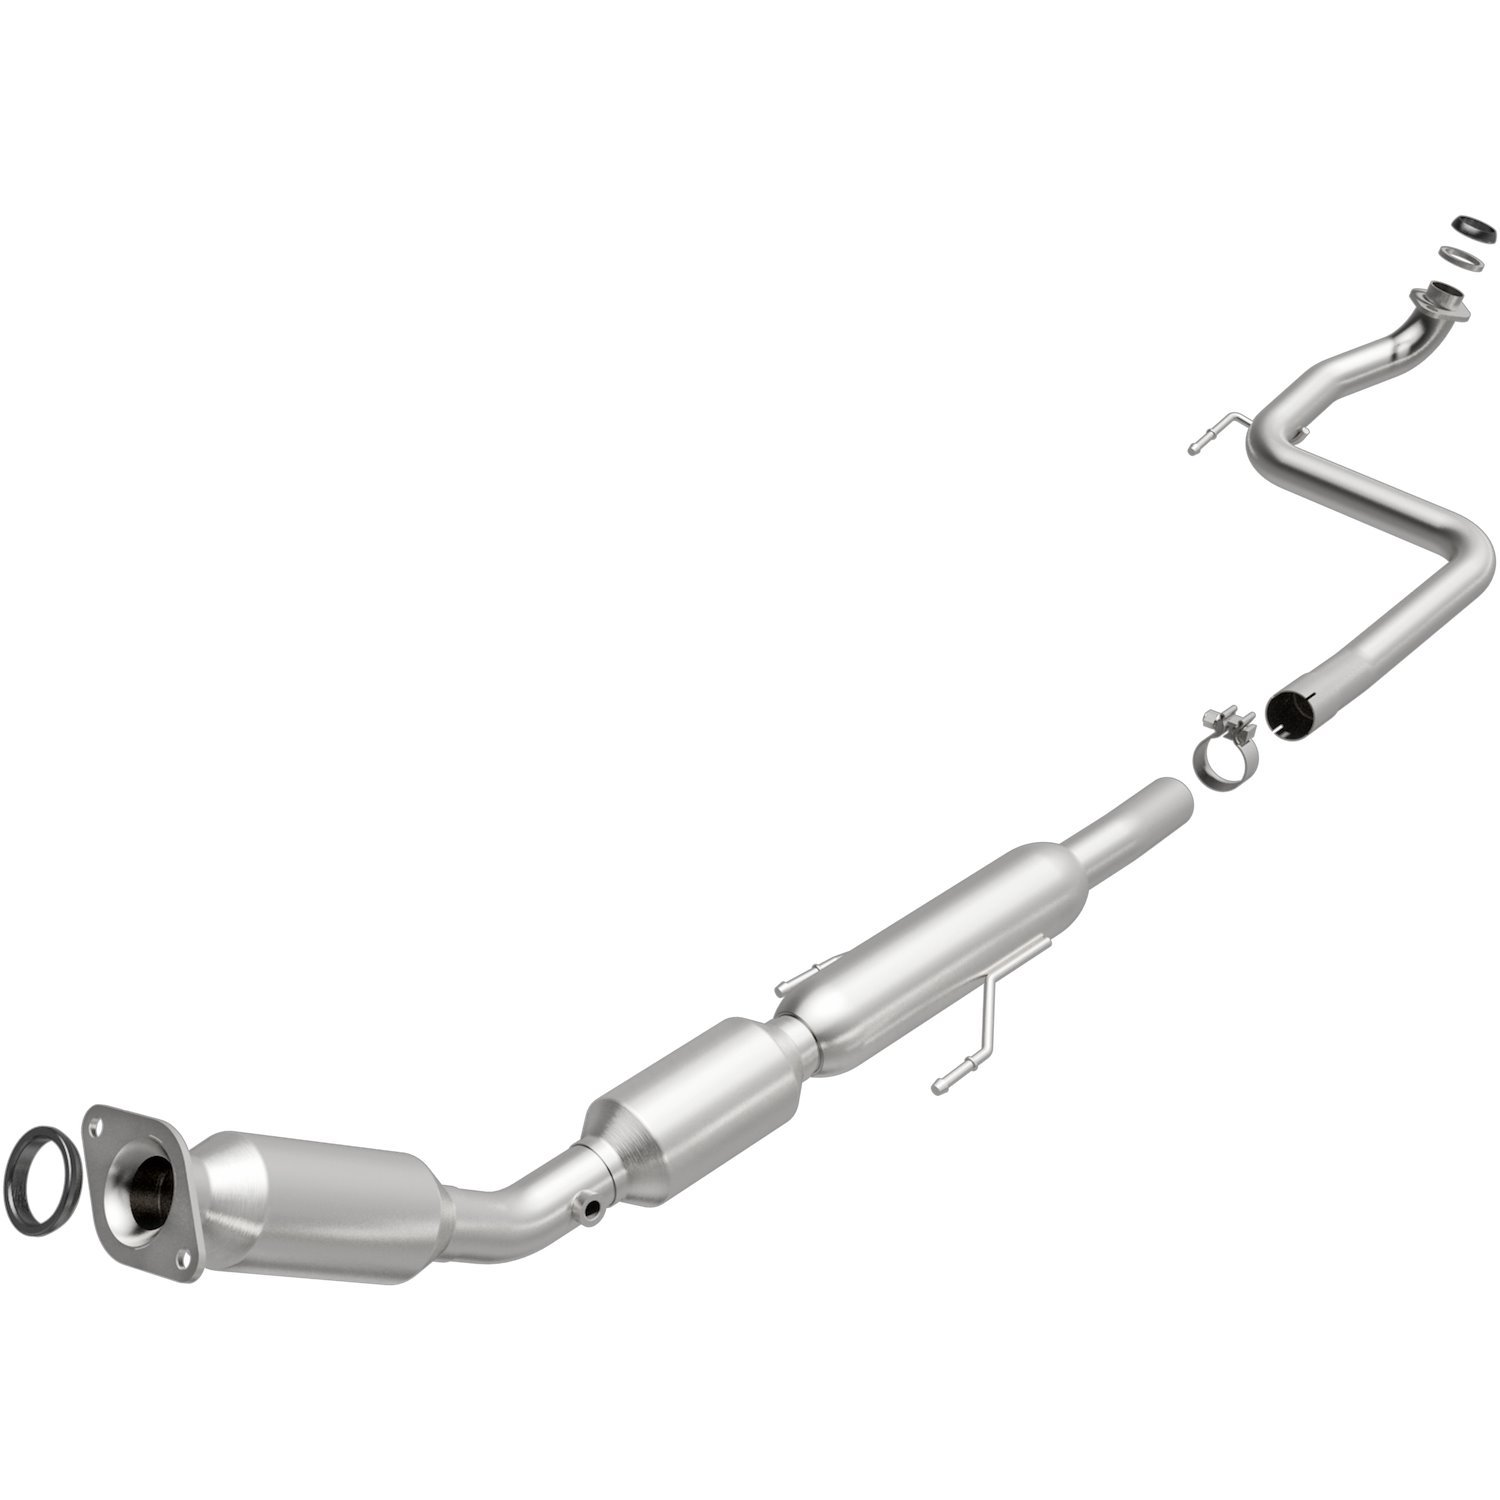 2008-2012 Scion xD OEM Grade Federal / EPA Compliant Direct-Fit Catalytic Converter